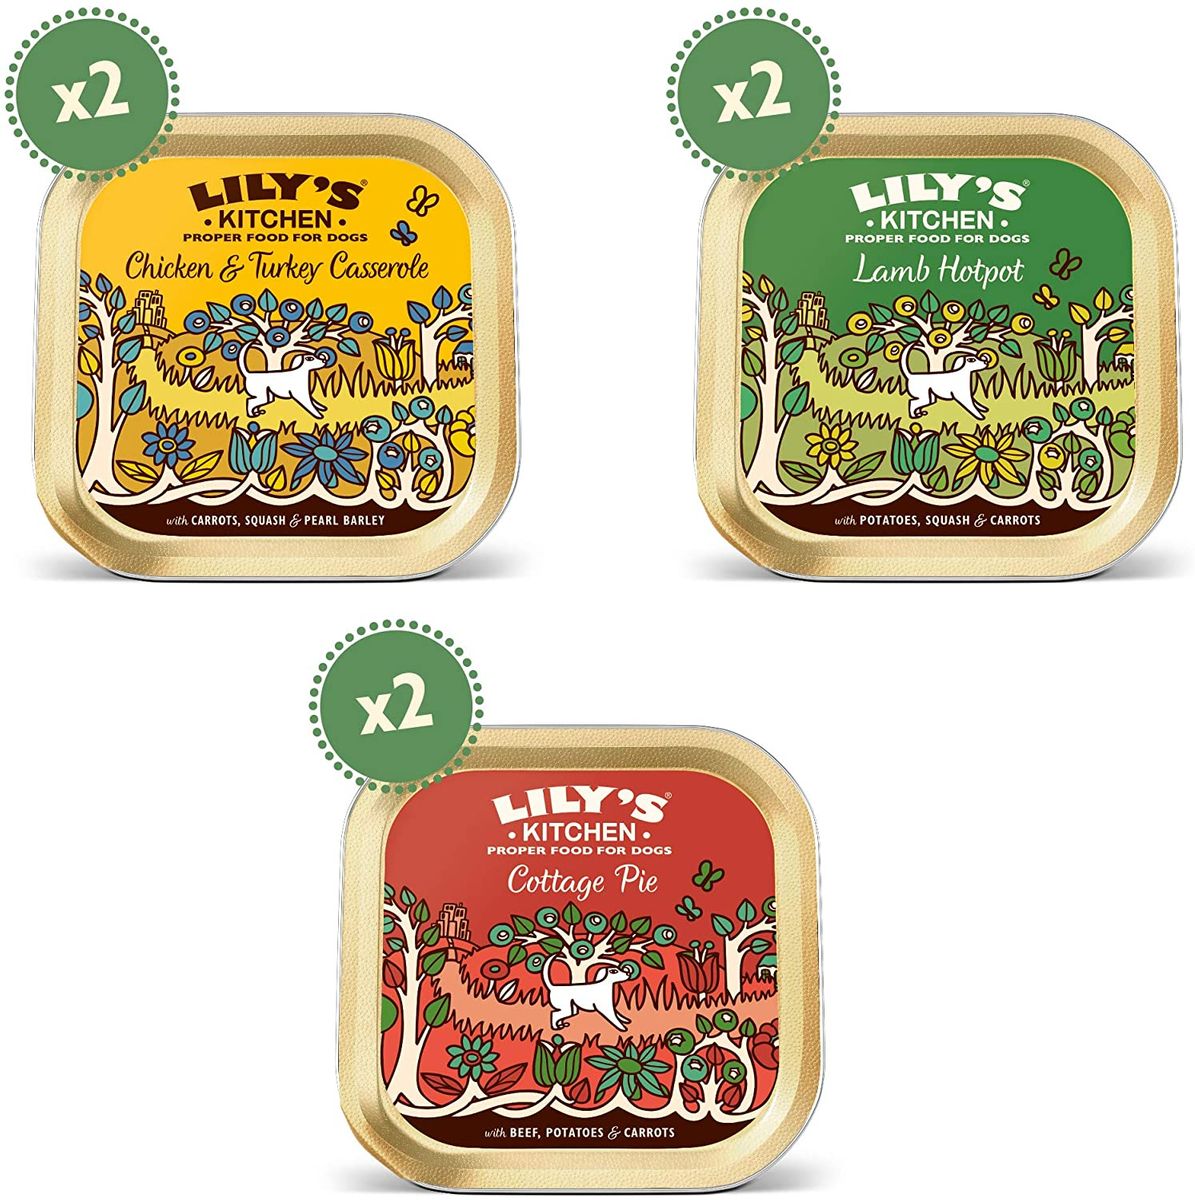 Canine Multipack Classic Dinner - Lily's Kitchen